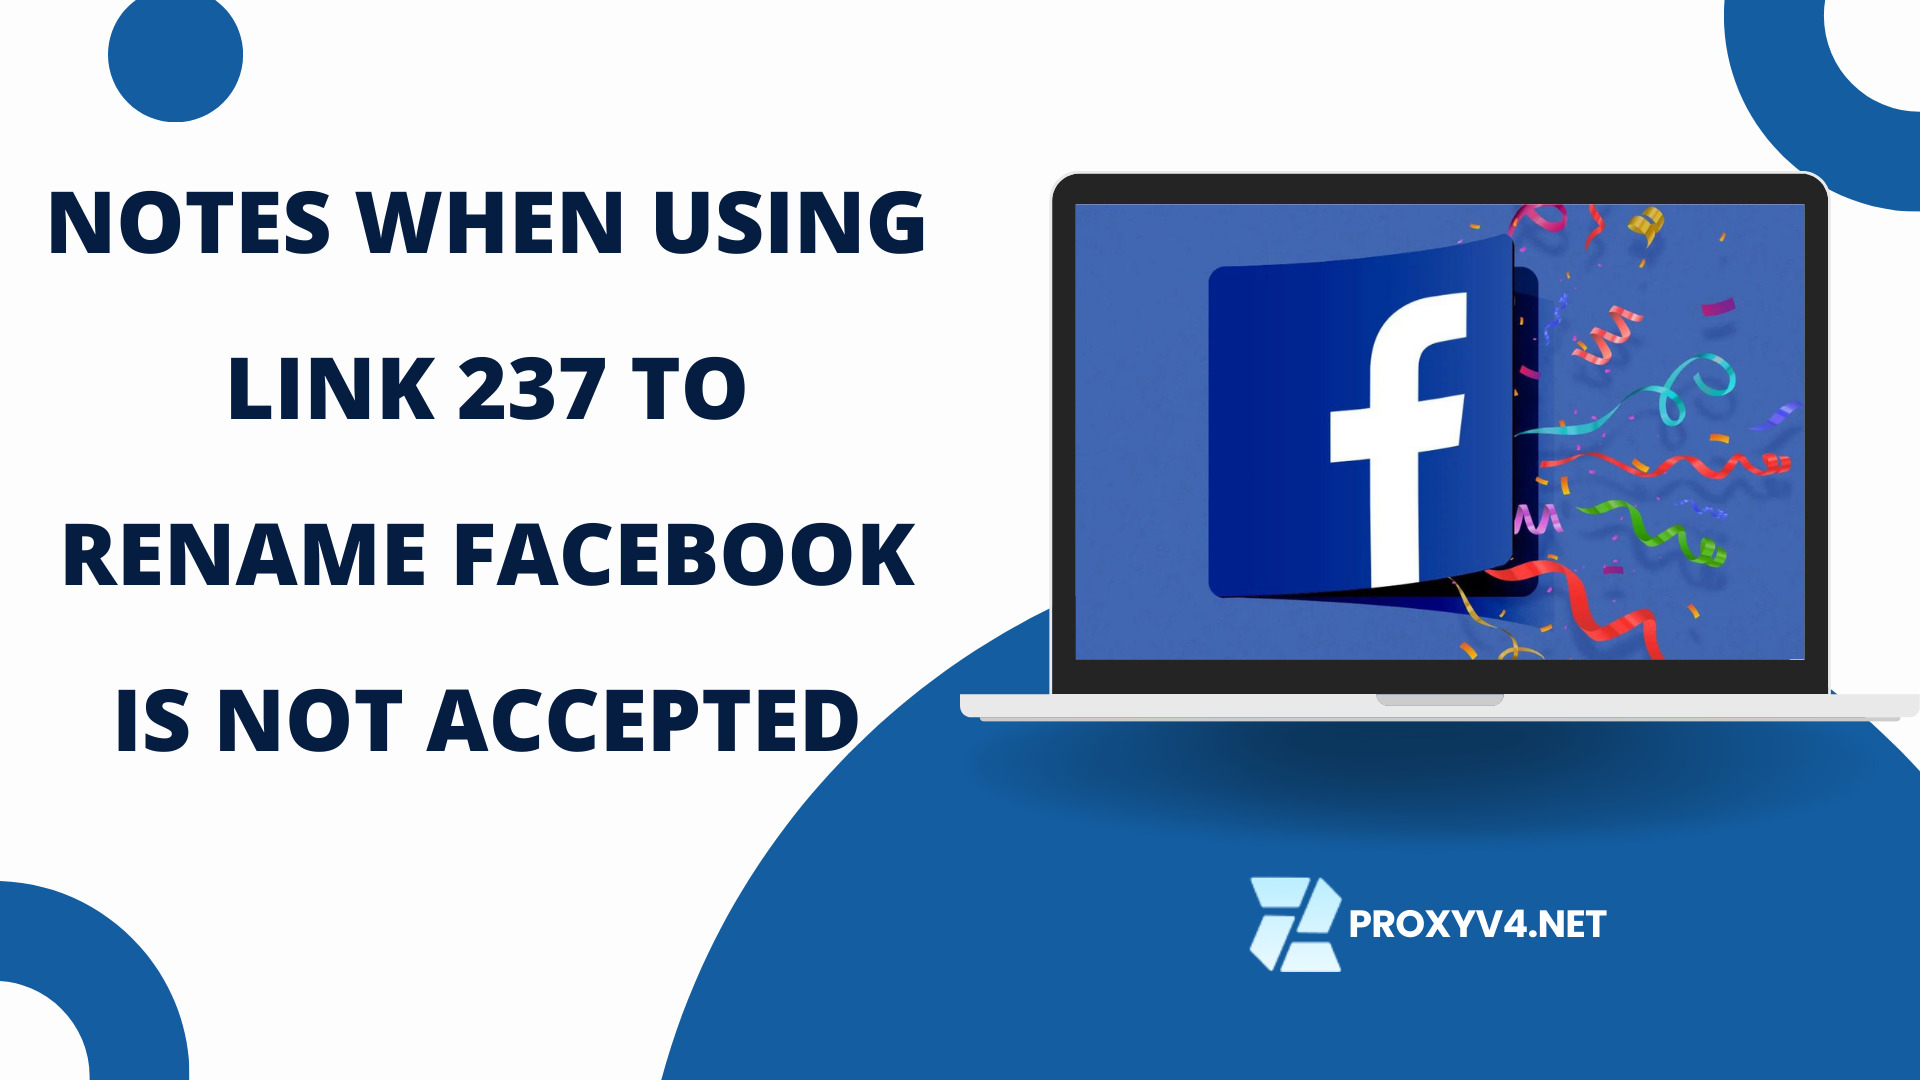 Notes when using Link 237 to rename Facebook is not accepted